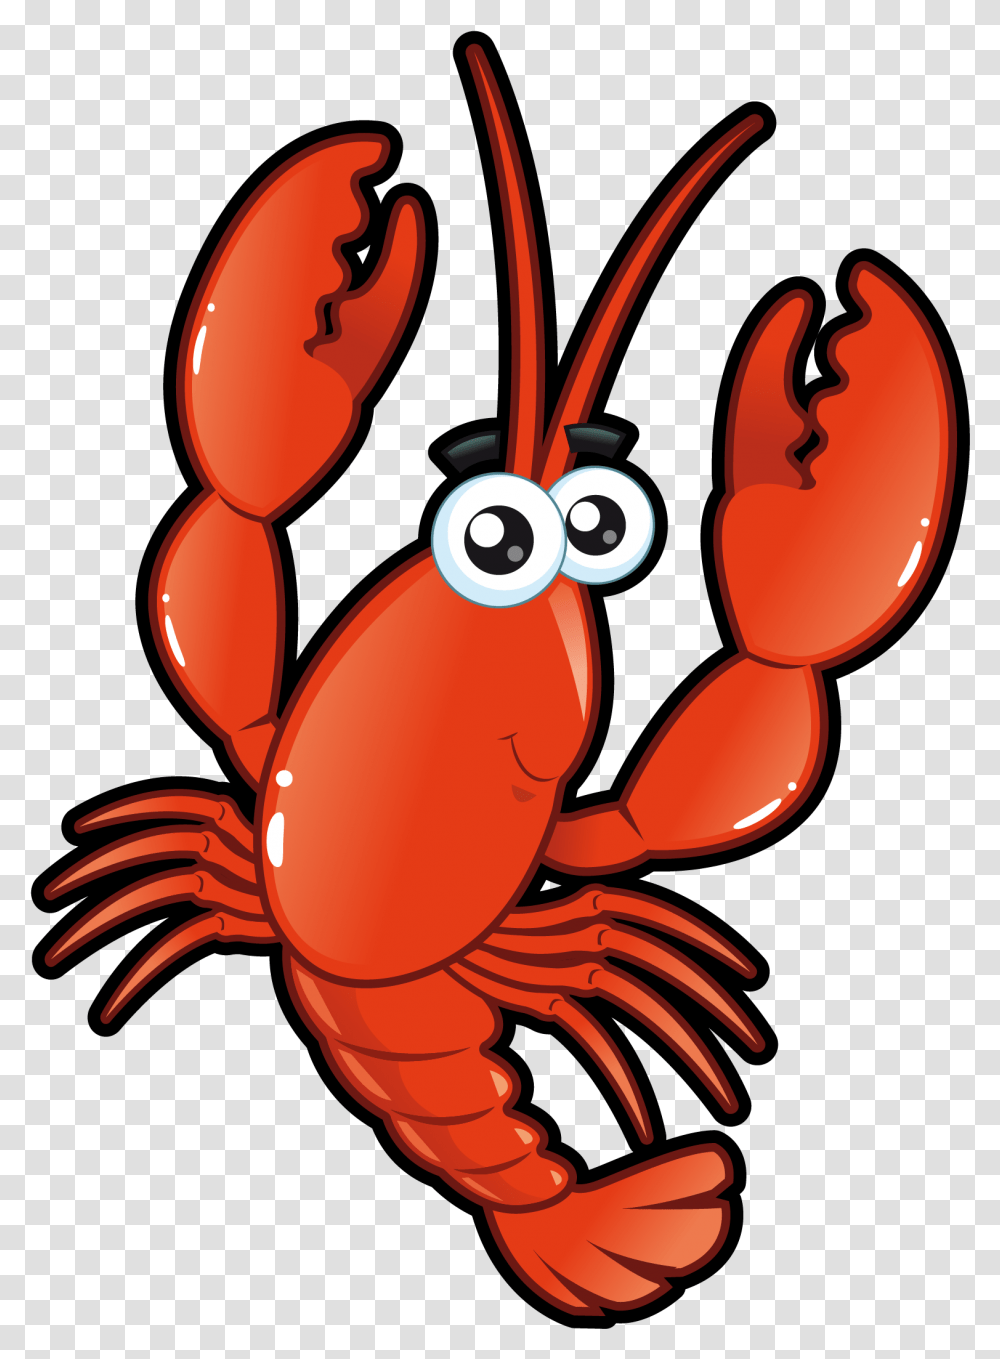 Homarus Cartoon Lobster Roll Drawing Animated Lobster Background, Crawdad, Seafood, Sea Life, Animal Transparent Png